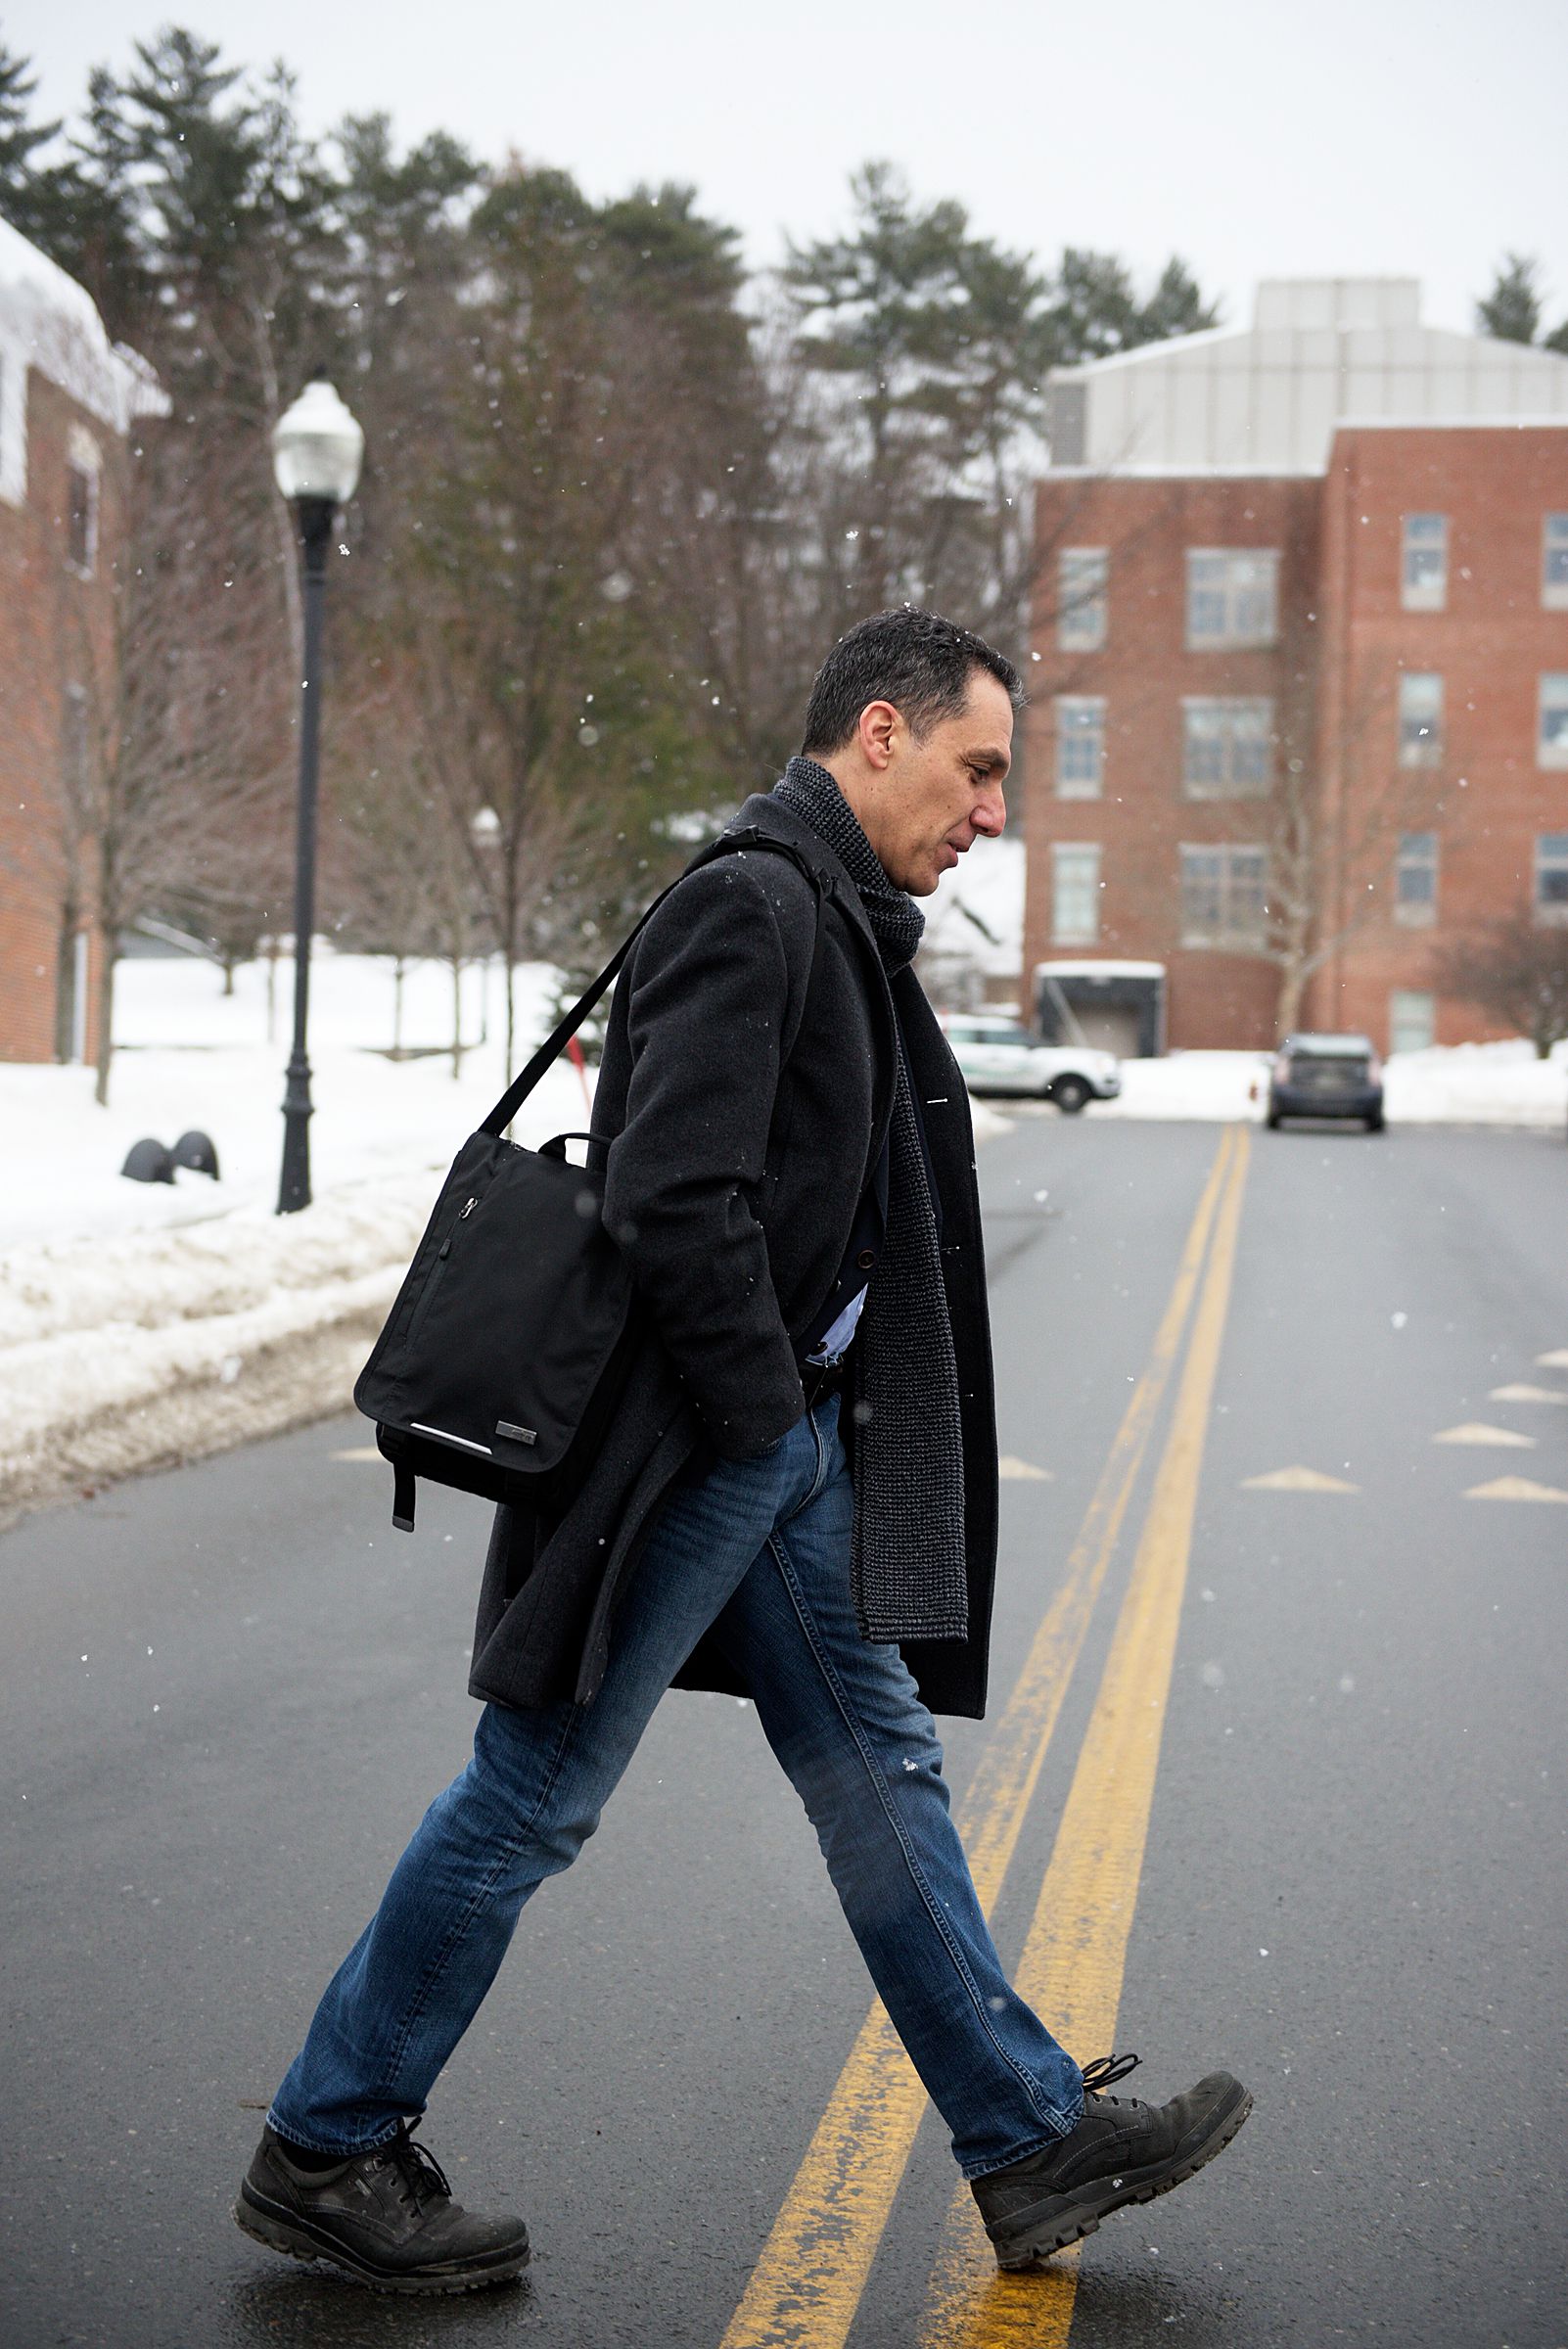 Hany Farid, of Norwich, walks to his office on the Dartmouth College campus in Hanover, N.H., on Wednesday, February 15, 2017. Farid is the chair of the computer science department at Dartmouth College and a leader in digital forensics, using his work to combat child pornography and extremist propaganda. (Valley News - James M. Patterson) Copyright Valley News. May not be reprinted or used online without permission. Send requests to permission@vnews.com.